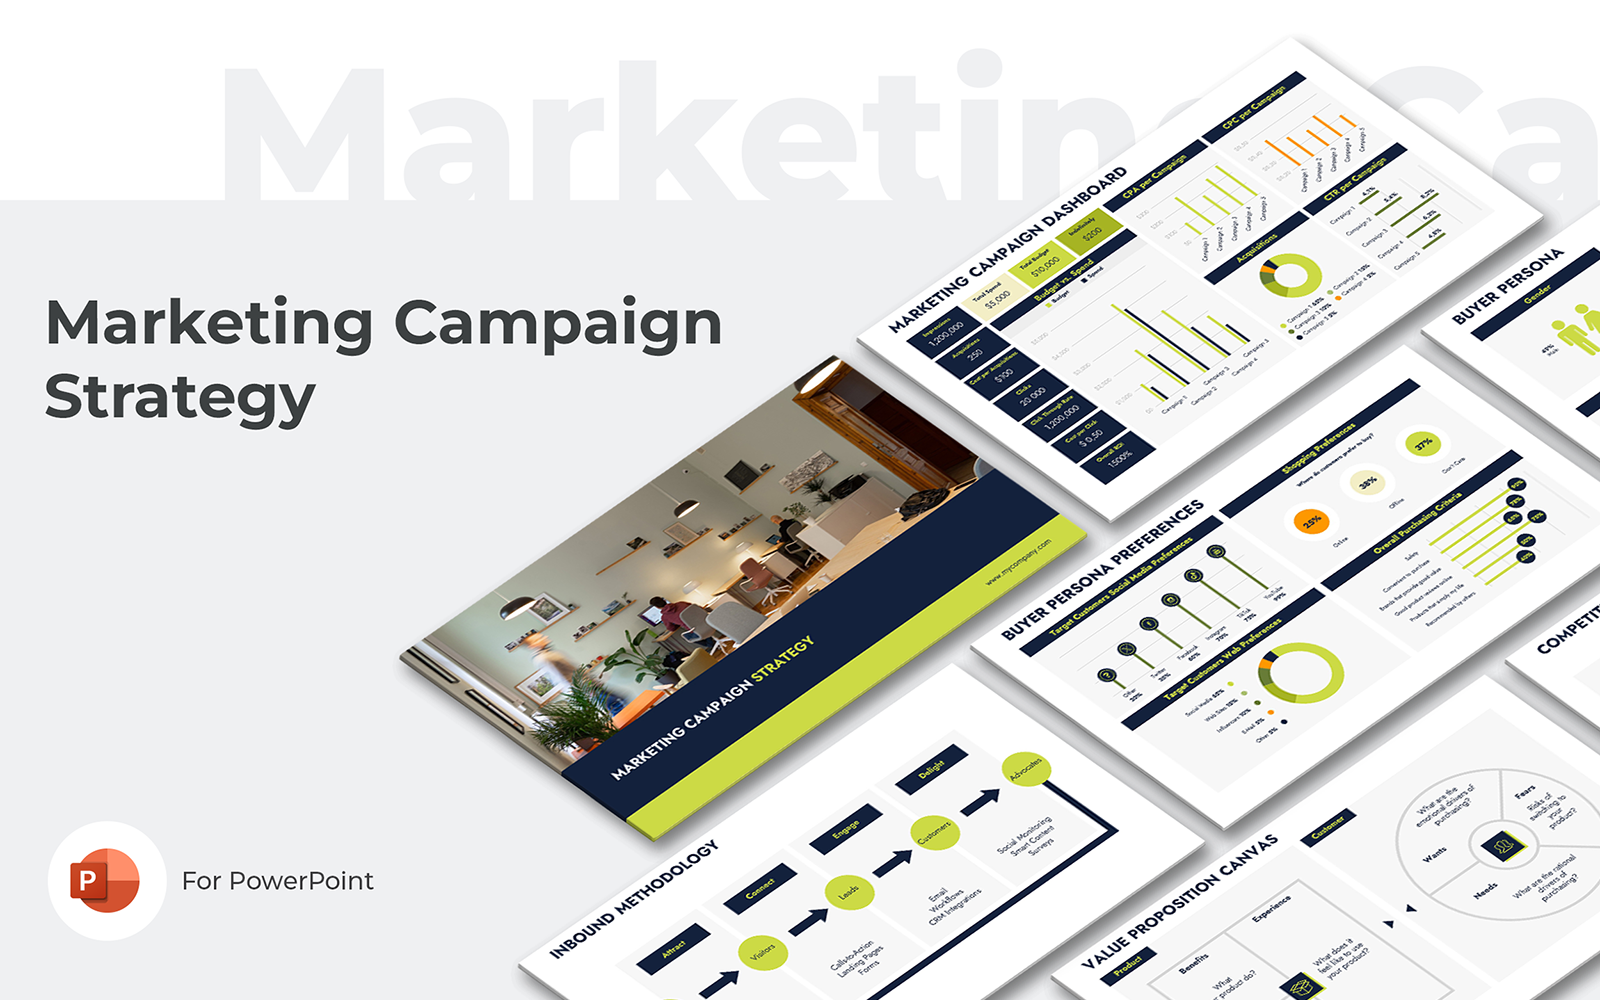 Marketing Campaign Strategy PowerPoint Presentation Template